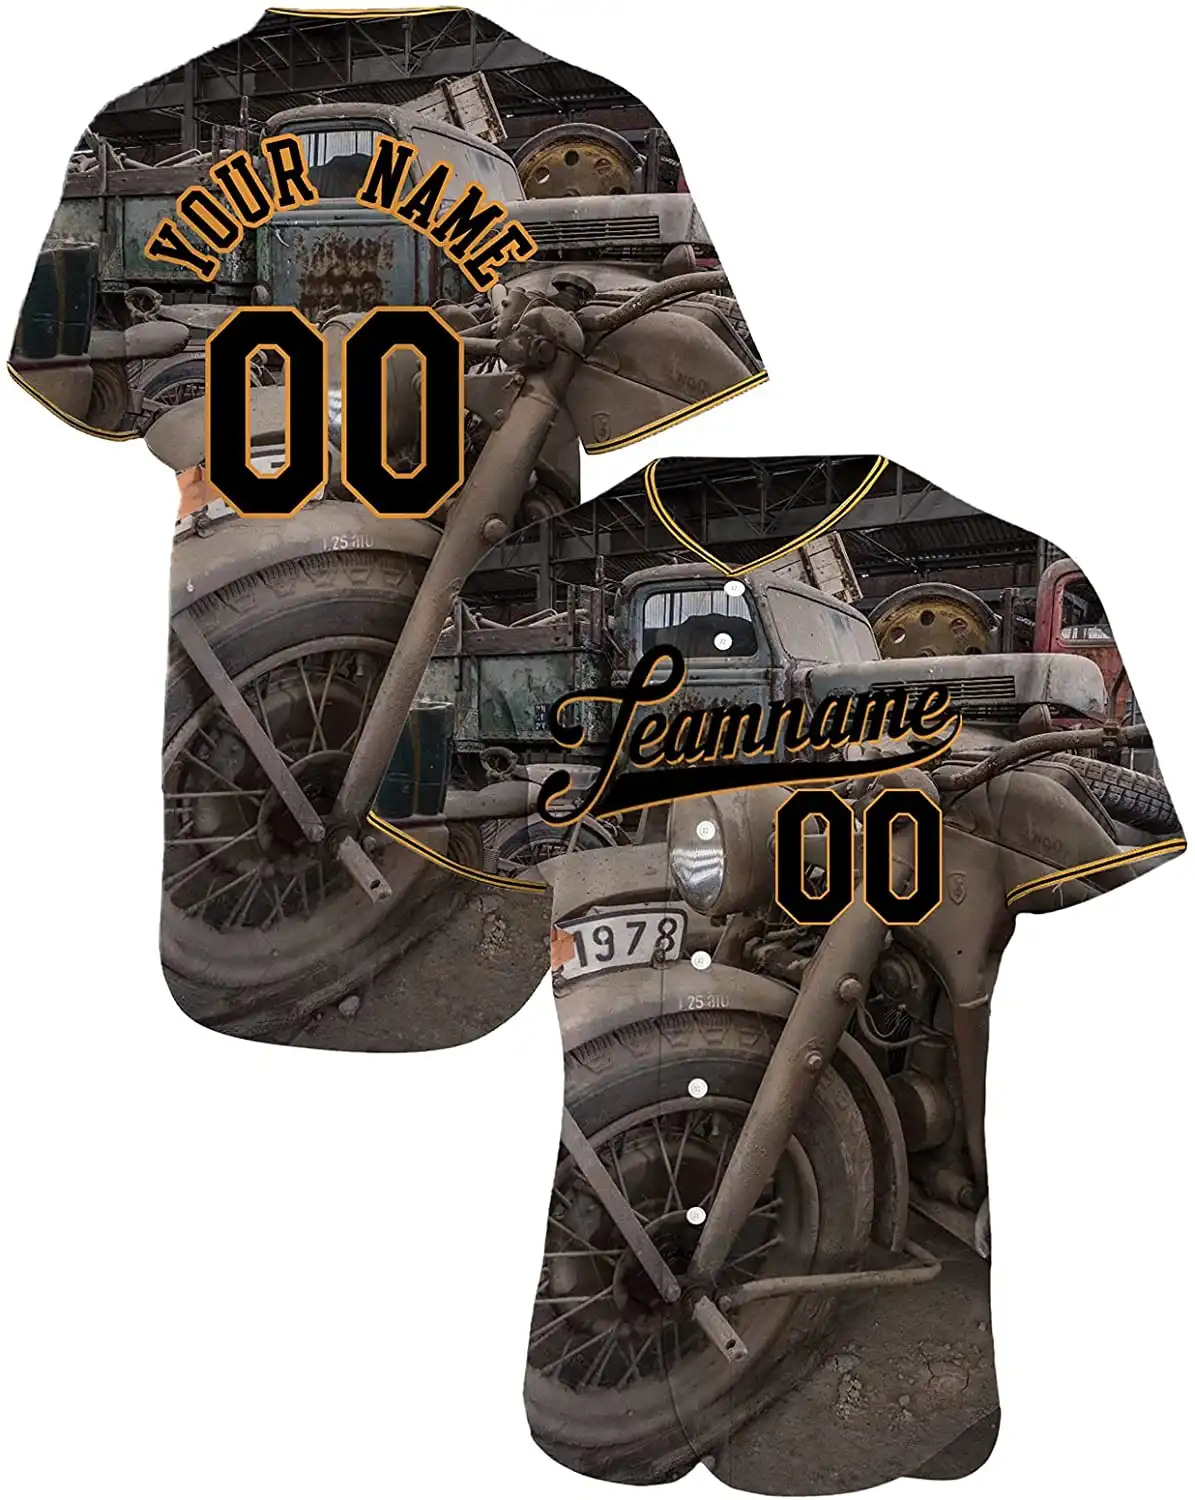 Personalized Motorcycle Made Of Wood Printed Name And Number Idea Gift For Fans Baseball Jersey